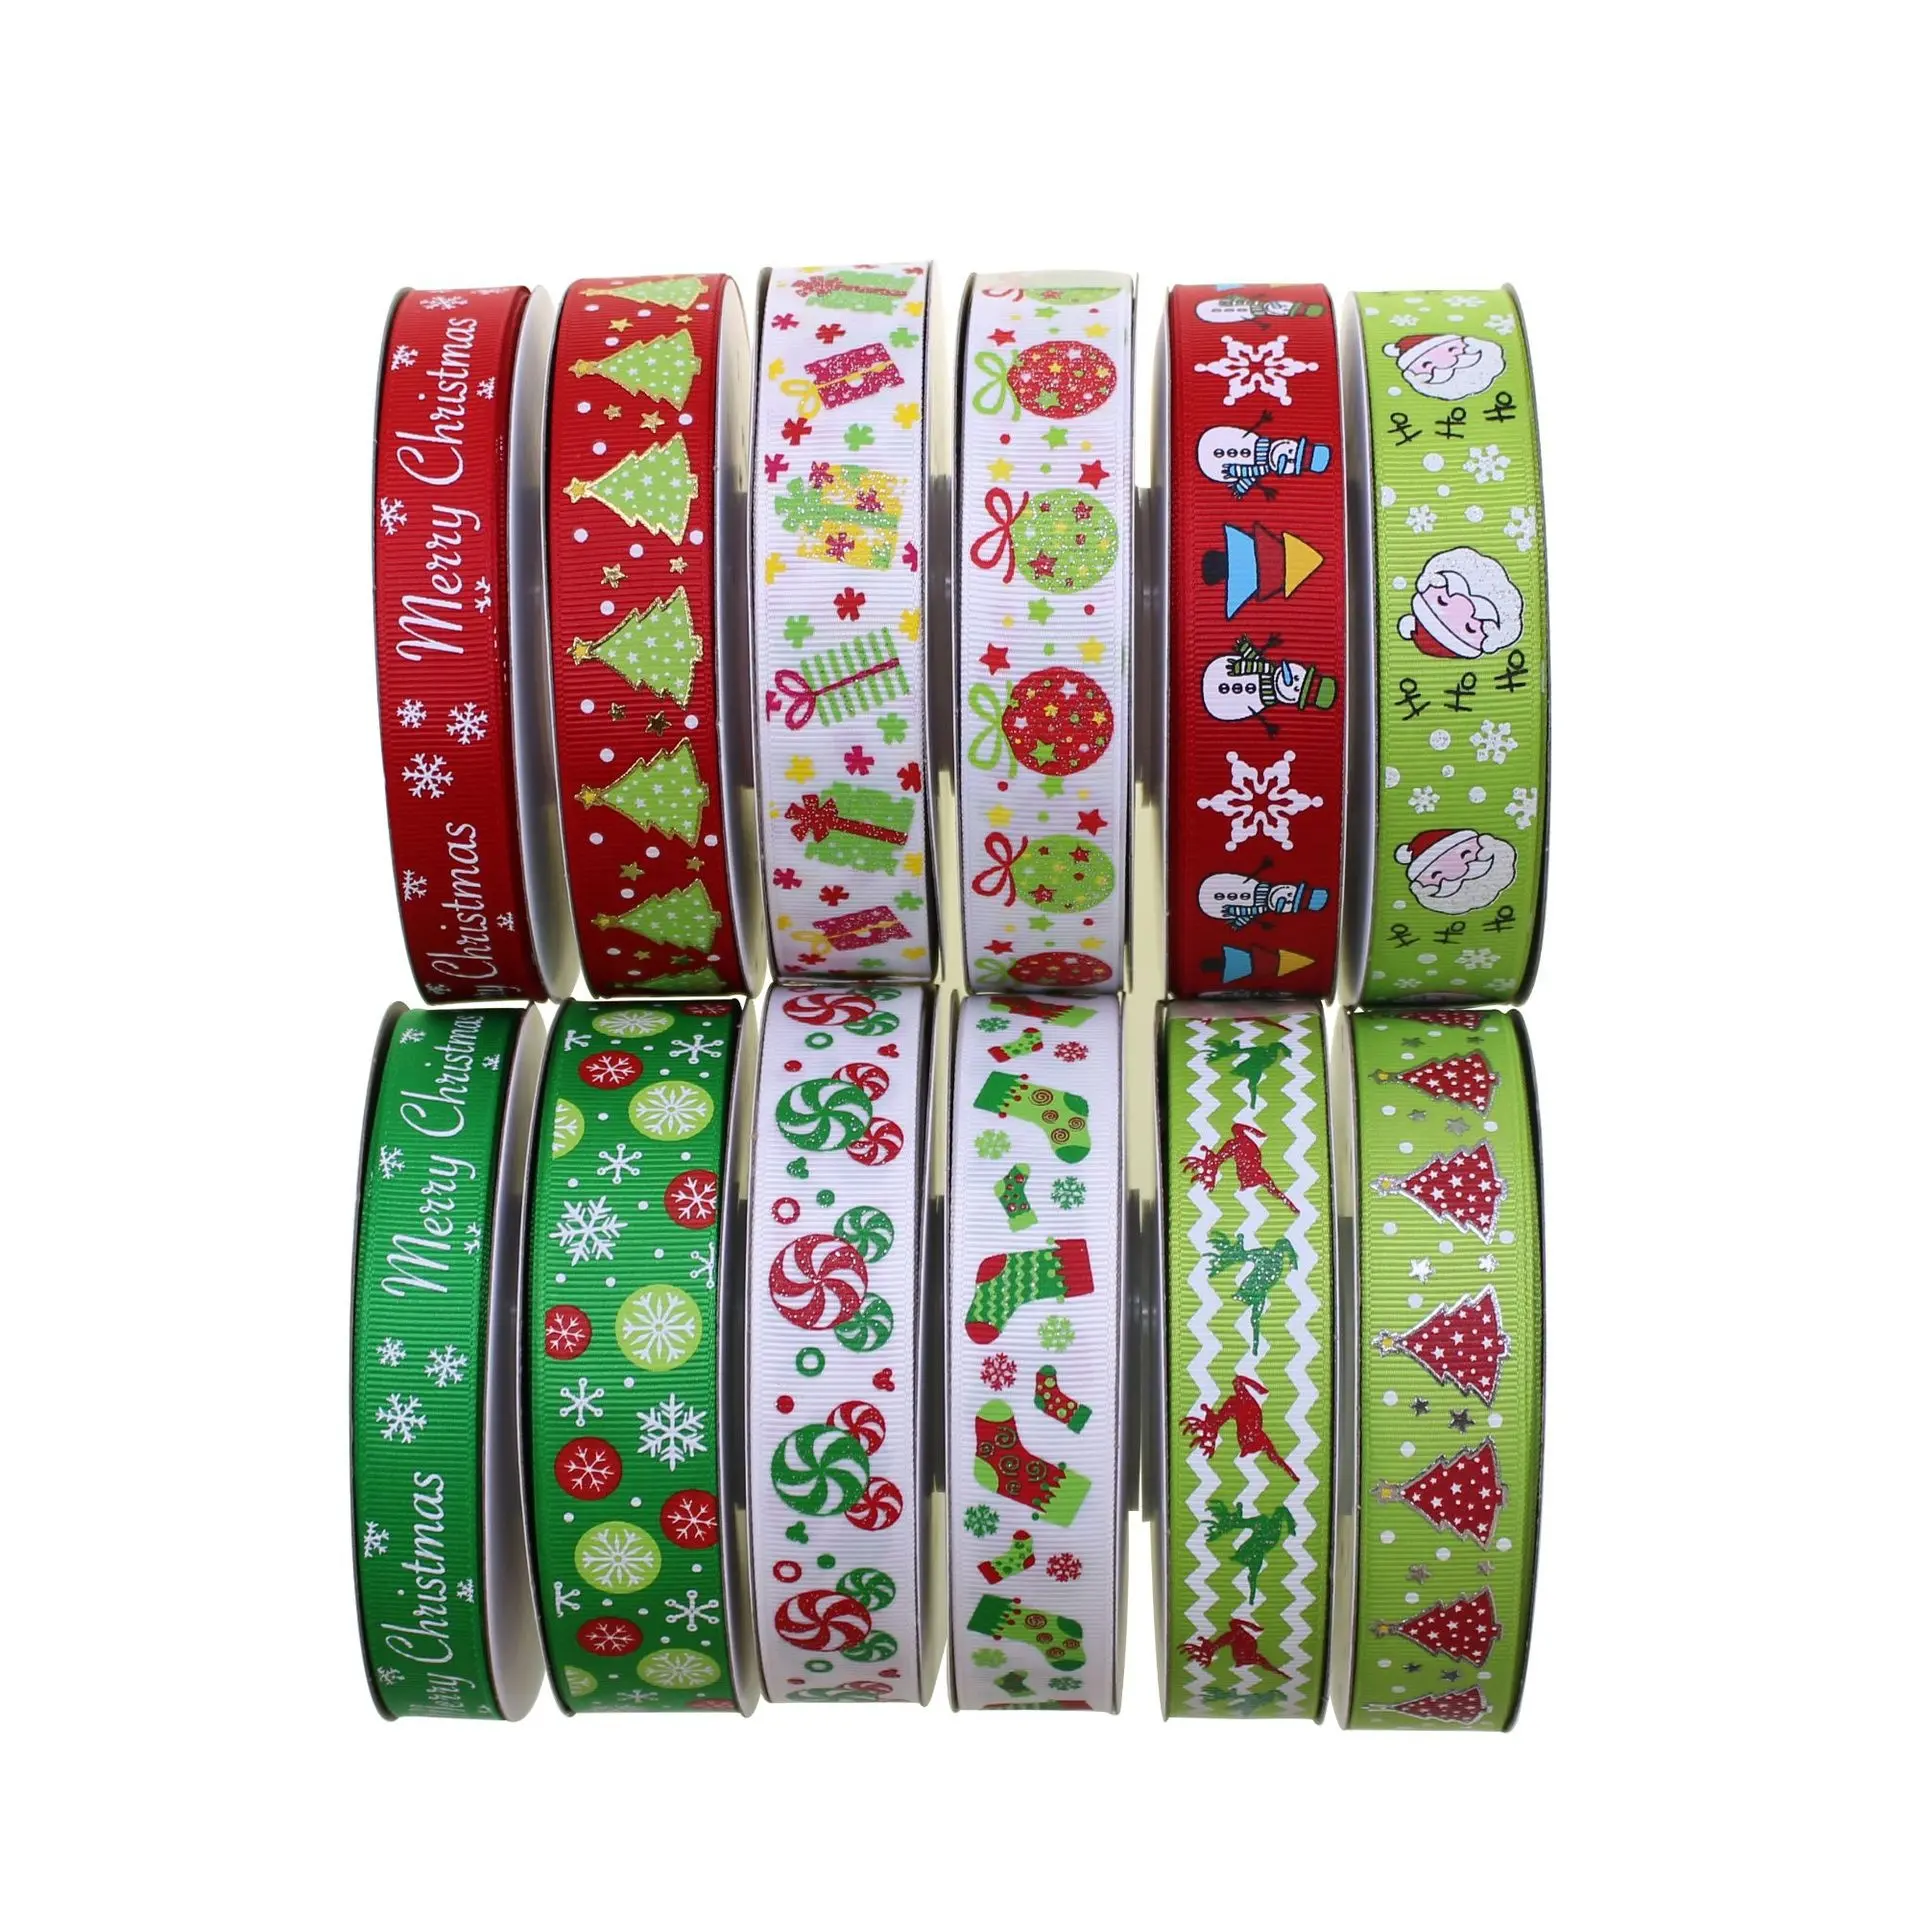 High Quality Best Price 7/8" 25 Yard Per Roll Christmas Grosgrain Ribbon For Crafts Decorations Gift Box Wrapping,